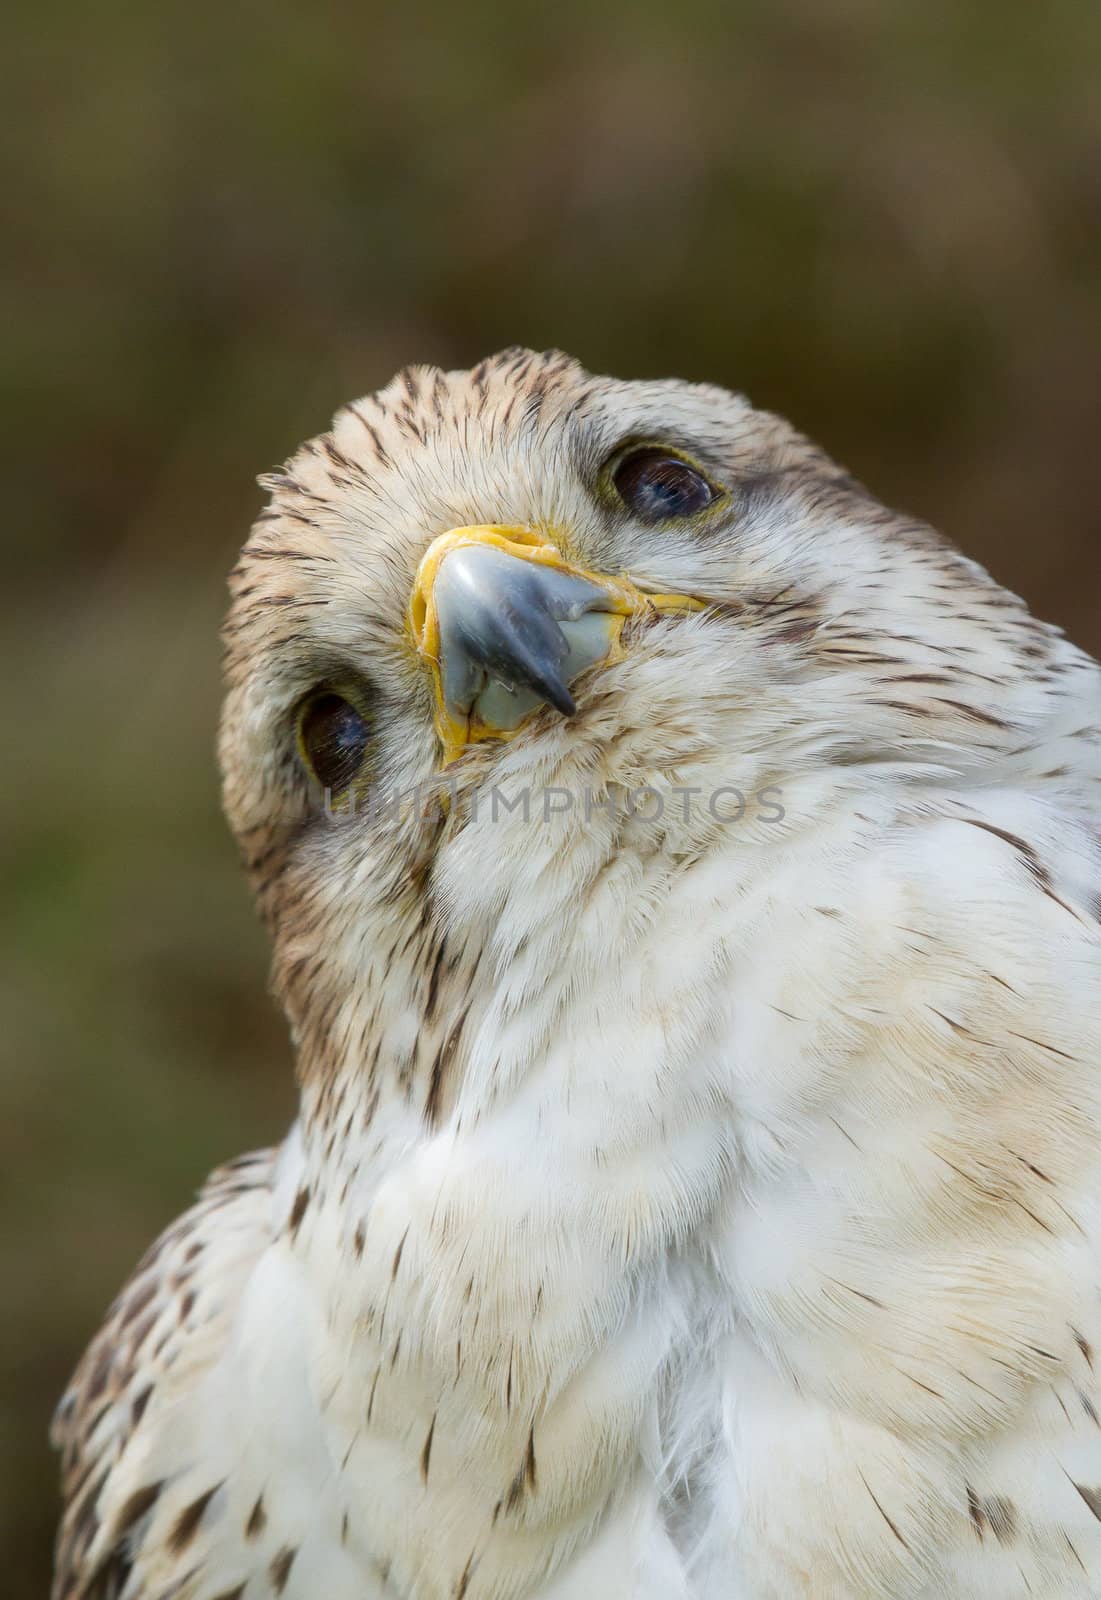 A close-up of a falcon by michaklootwijk